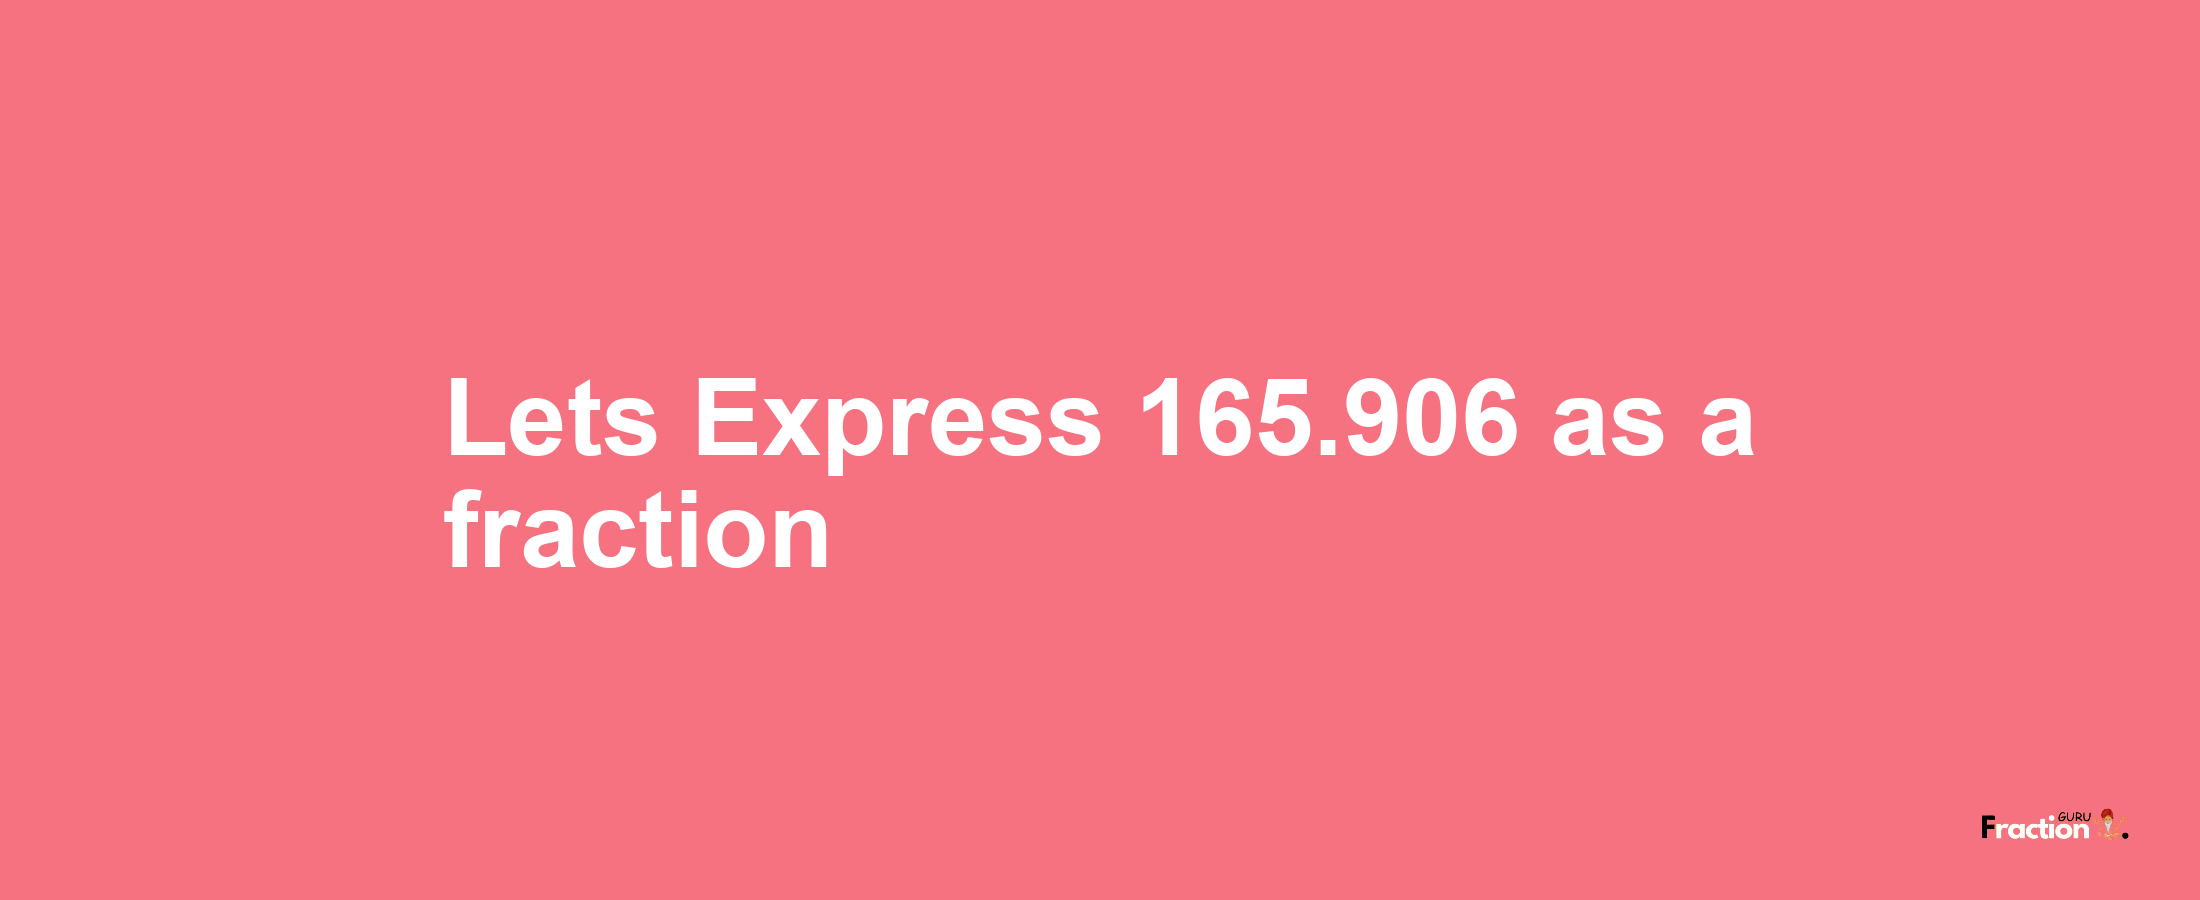 Lets Express 165.906 as afraction